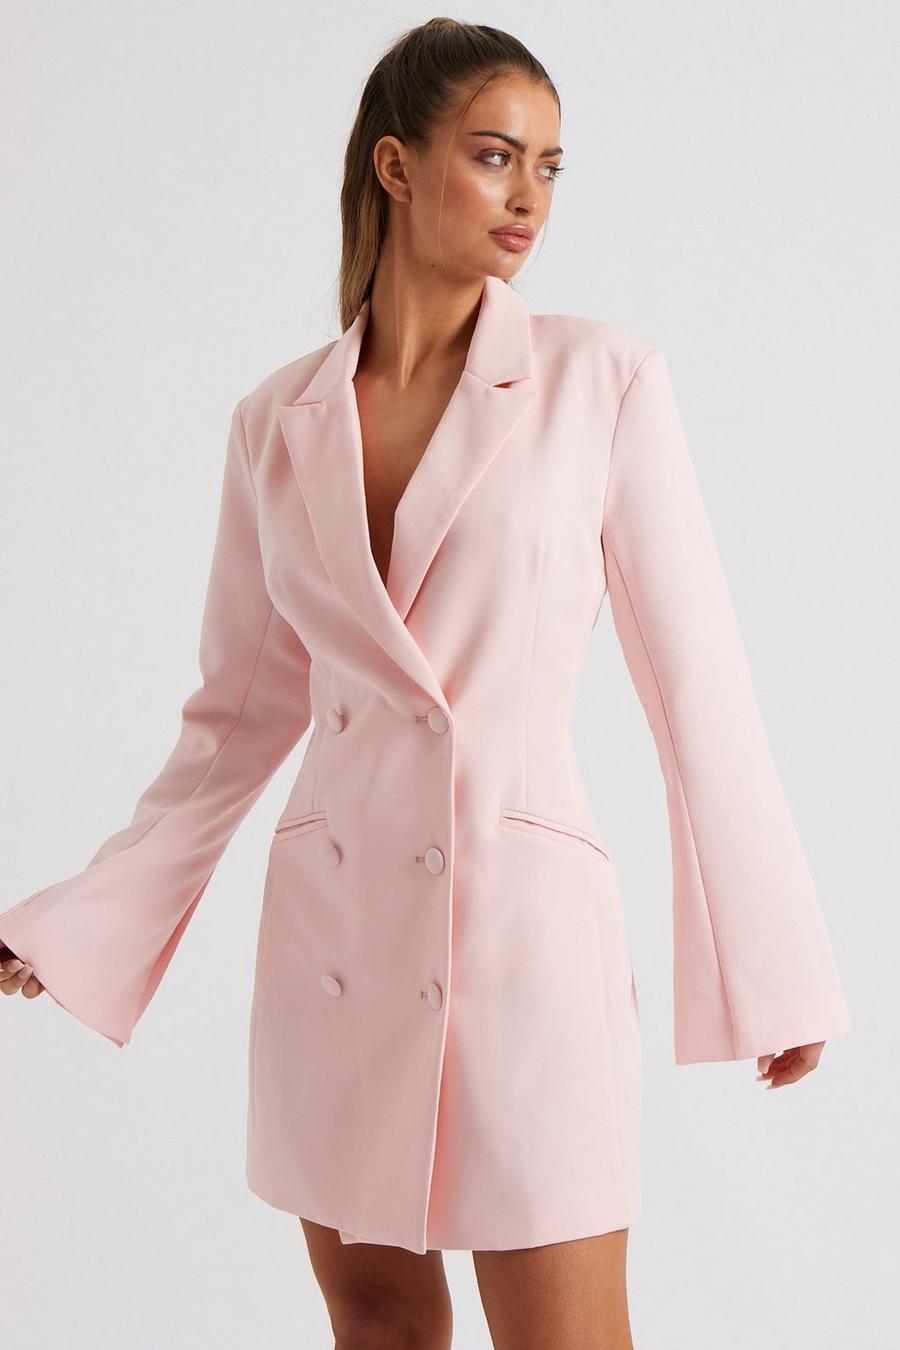 Baby pink Blush Flare Sleeve Fitted Blazer Dress